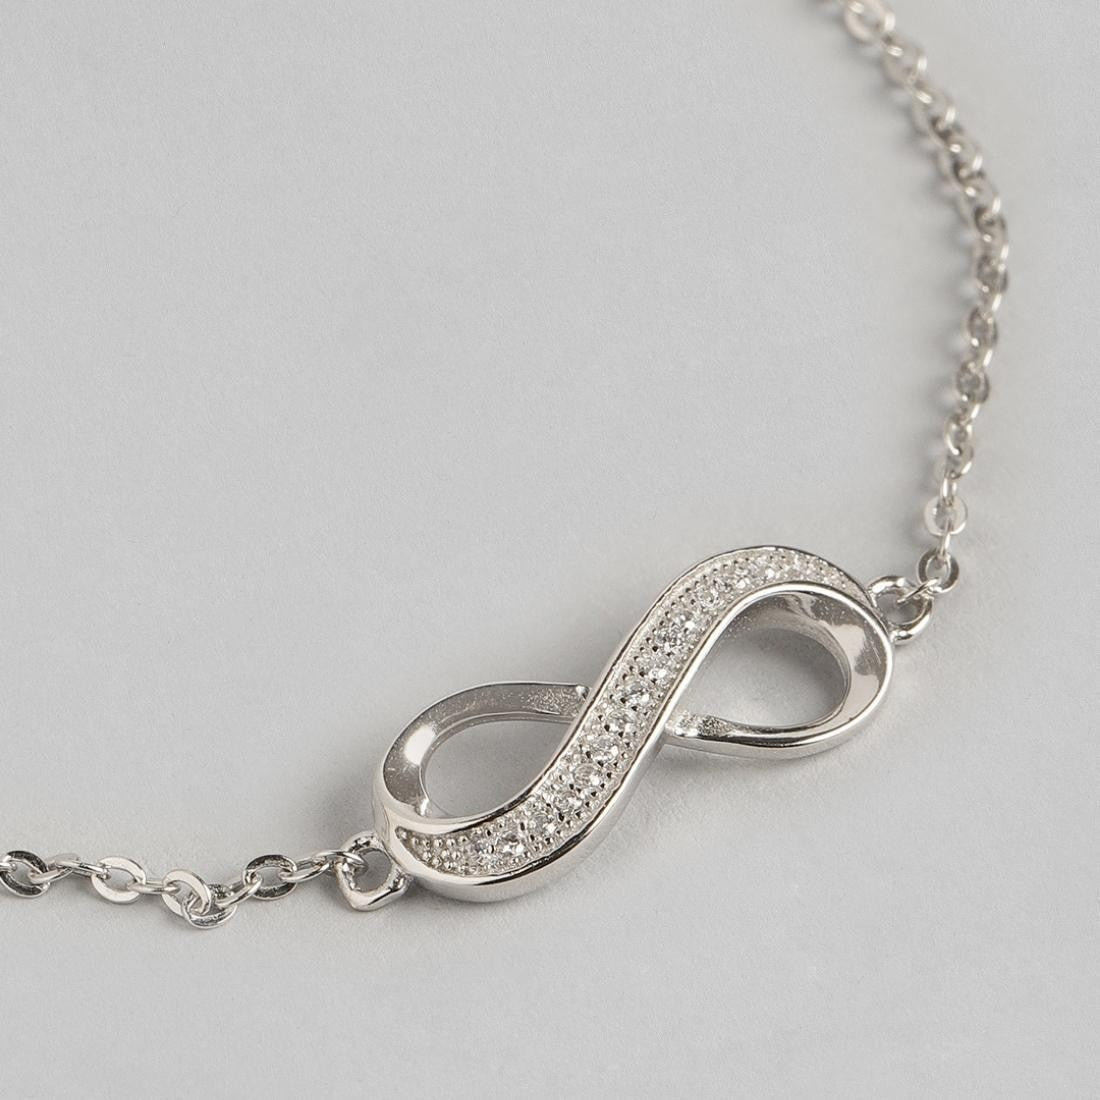 To Infinity and Beyond 925 Silver Bracelet